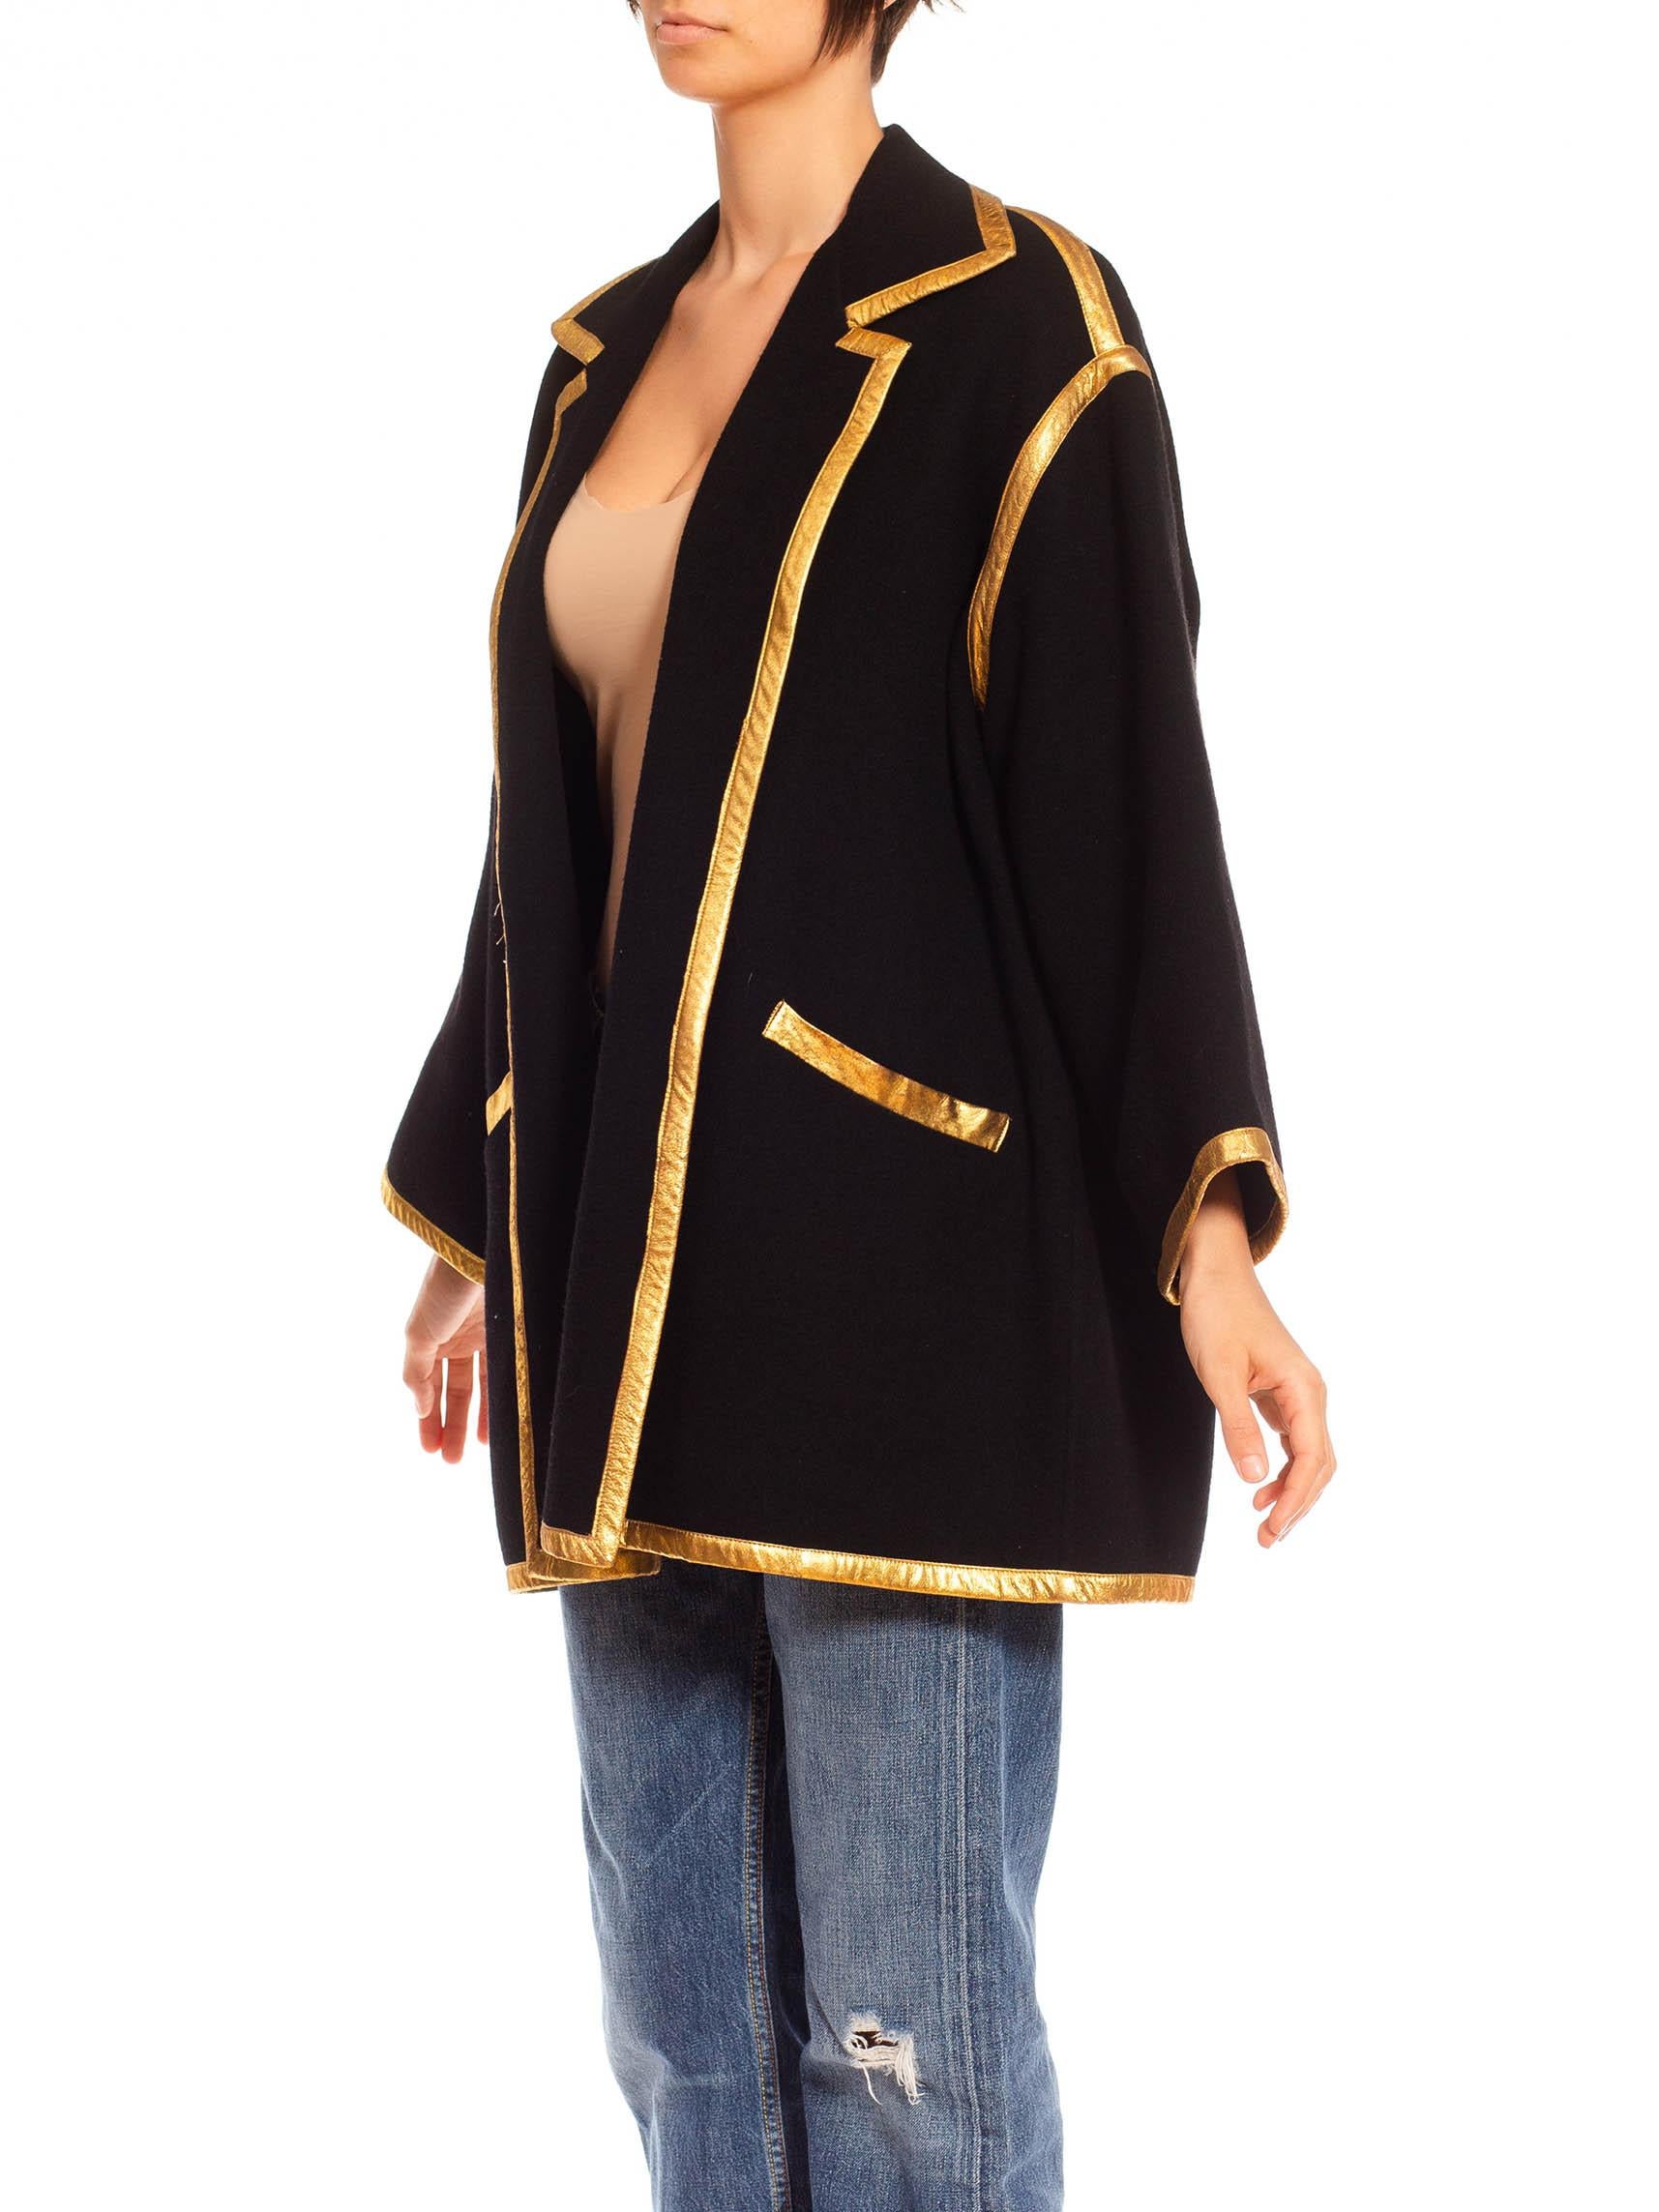 1980S Donna Karan Black Wool Coat With Gold Trimmings 2